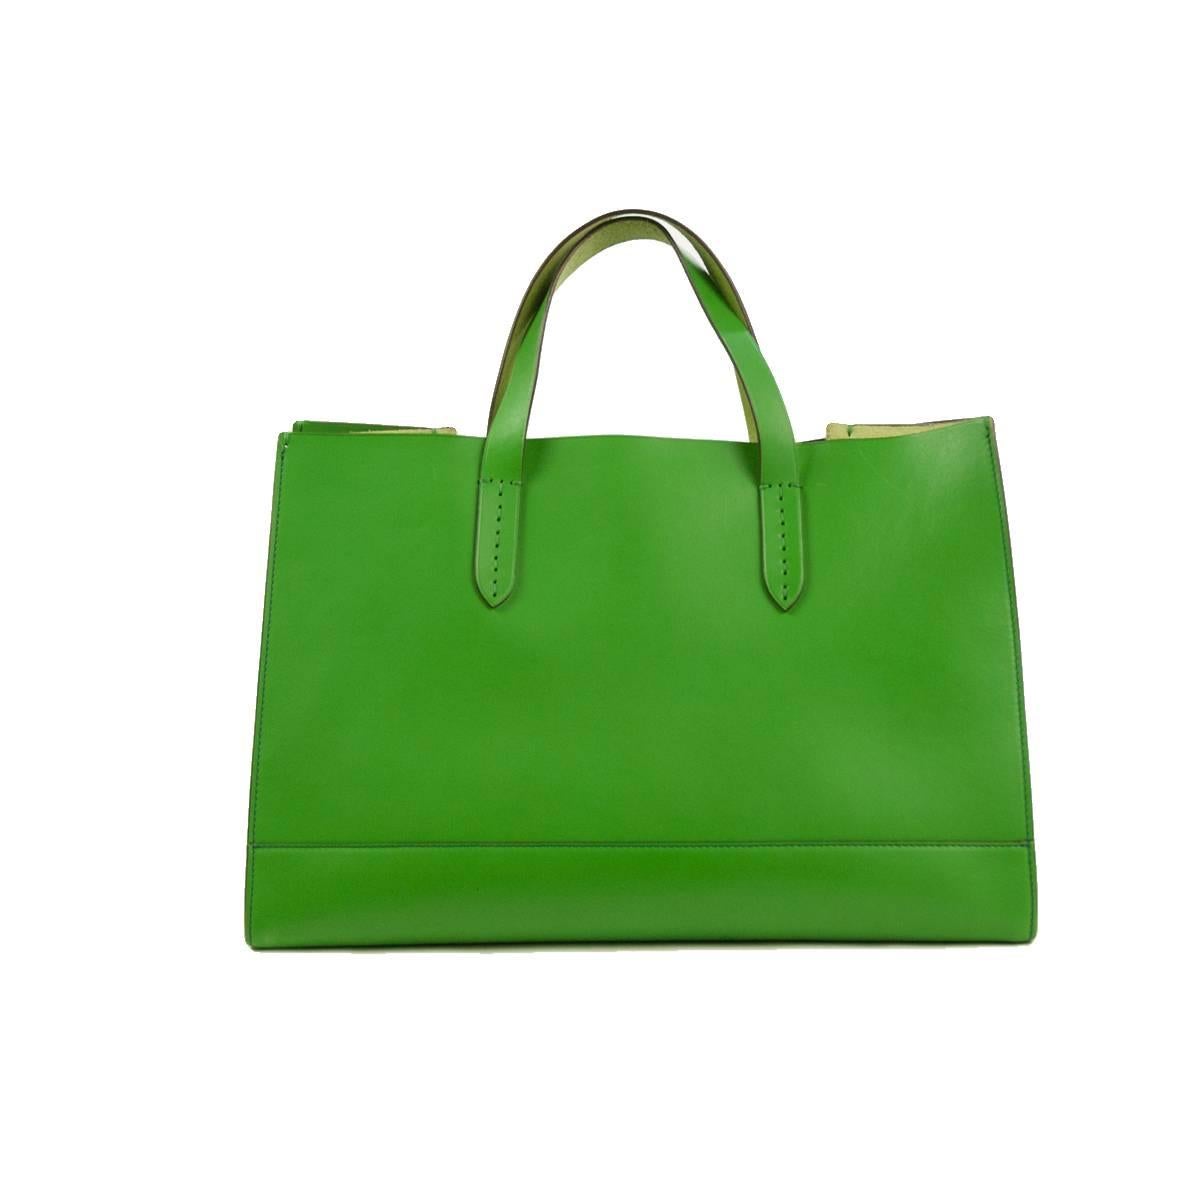 Beautiful color and style for this Ralph Lauren Saddle Tote
Leather
Green color
Two handles
Leather closure
With internal envelope bag (zip)
Cm 41 x 28 x 22
Worldwide express shipping included in the price !